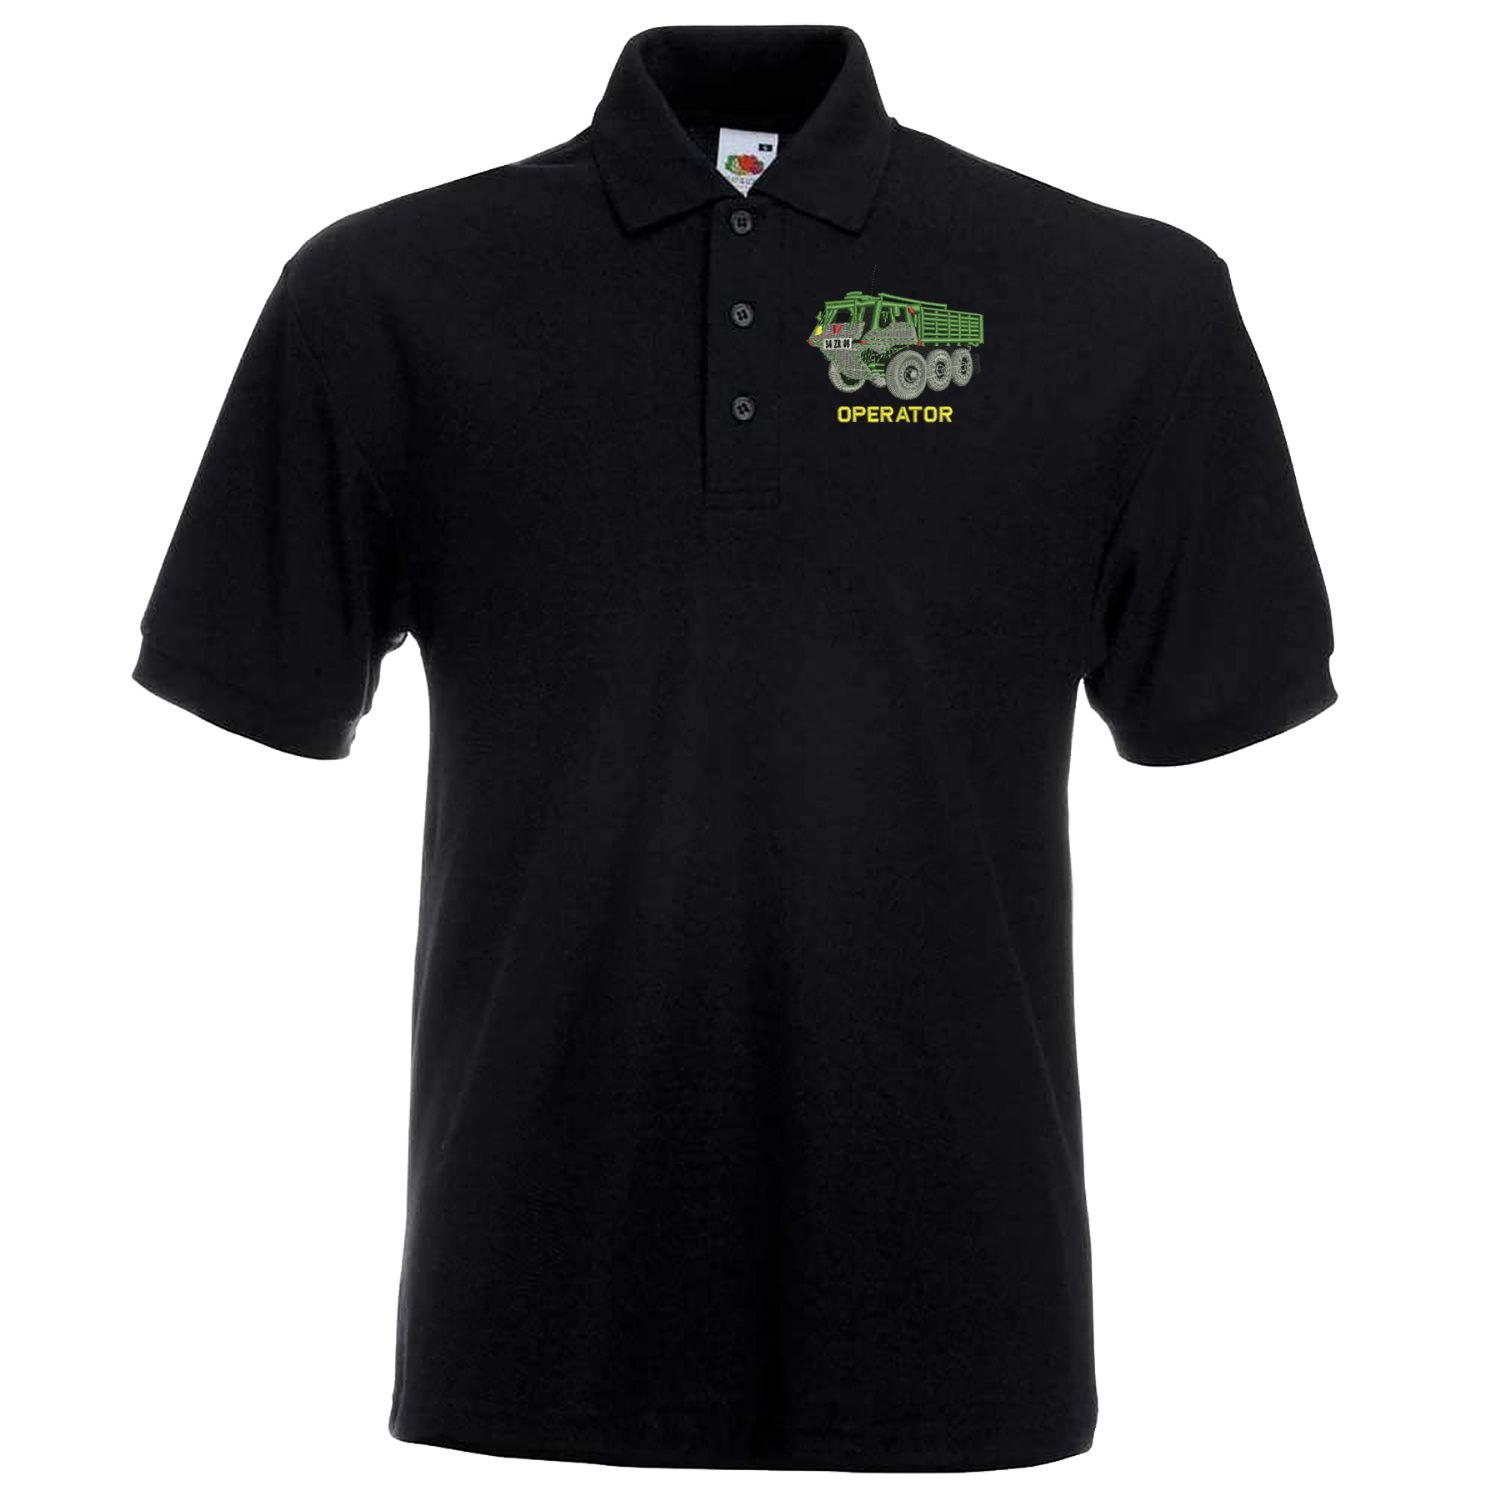 Stolly Operator Embroidered Polo Shirt SMALL BLK